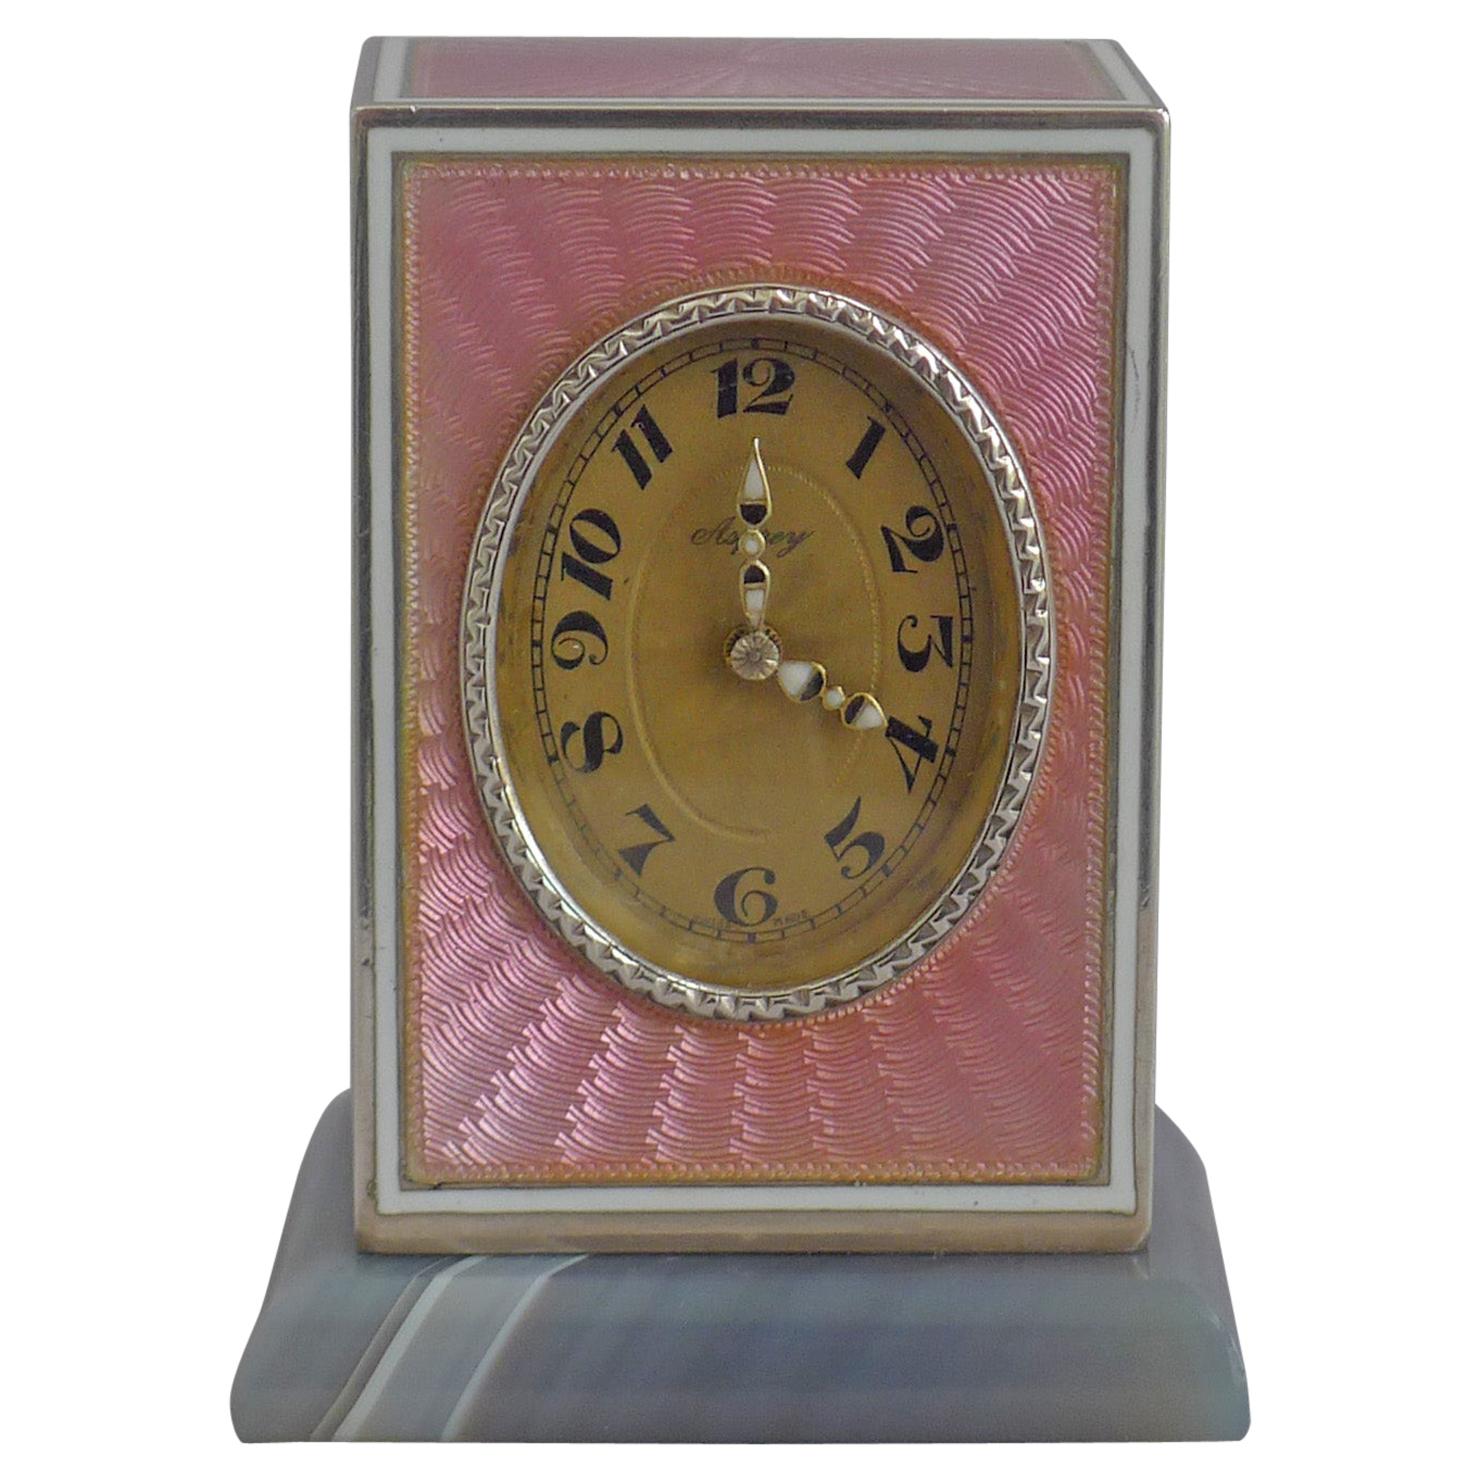 Pink Guilloche Enamel and Silver Sub-Miniature Carriage Clock by Asprey